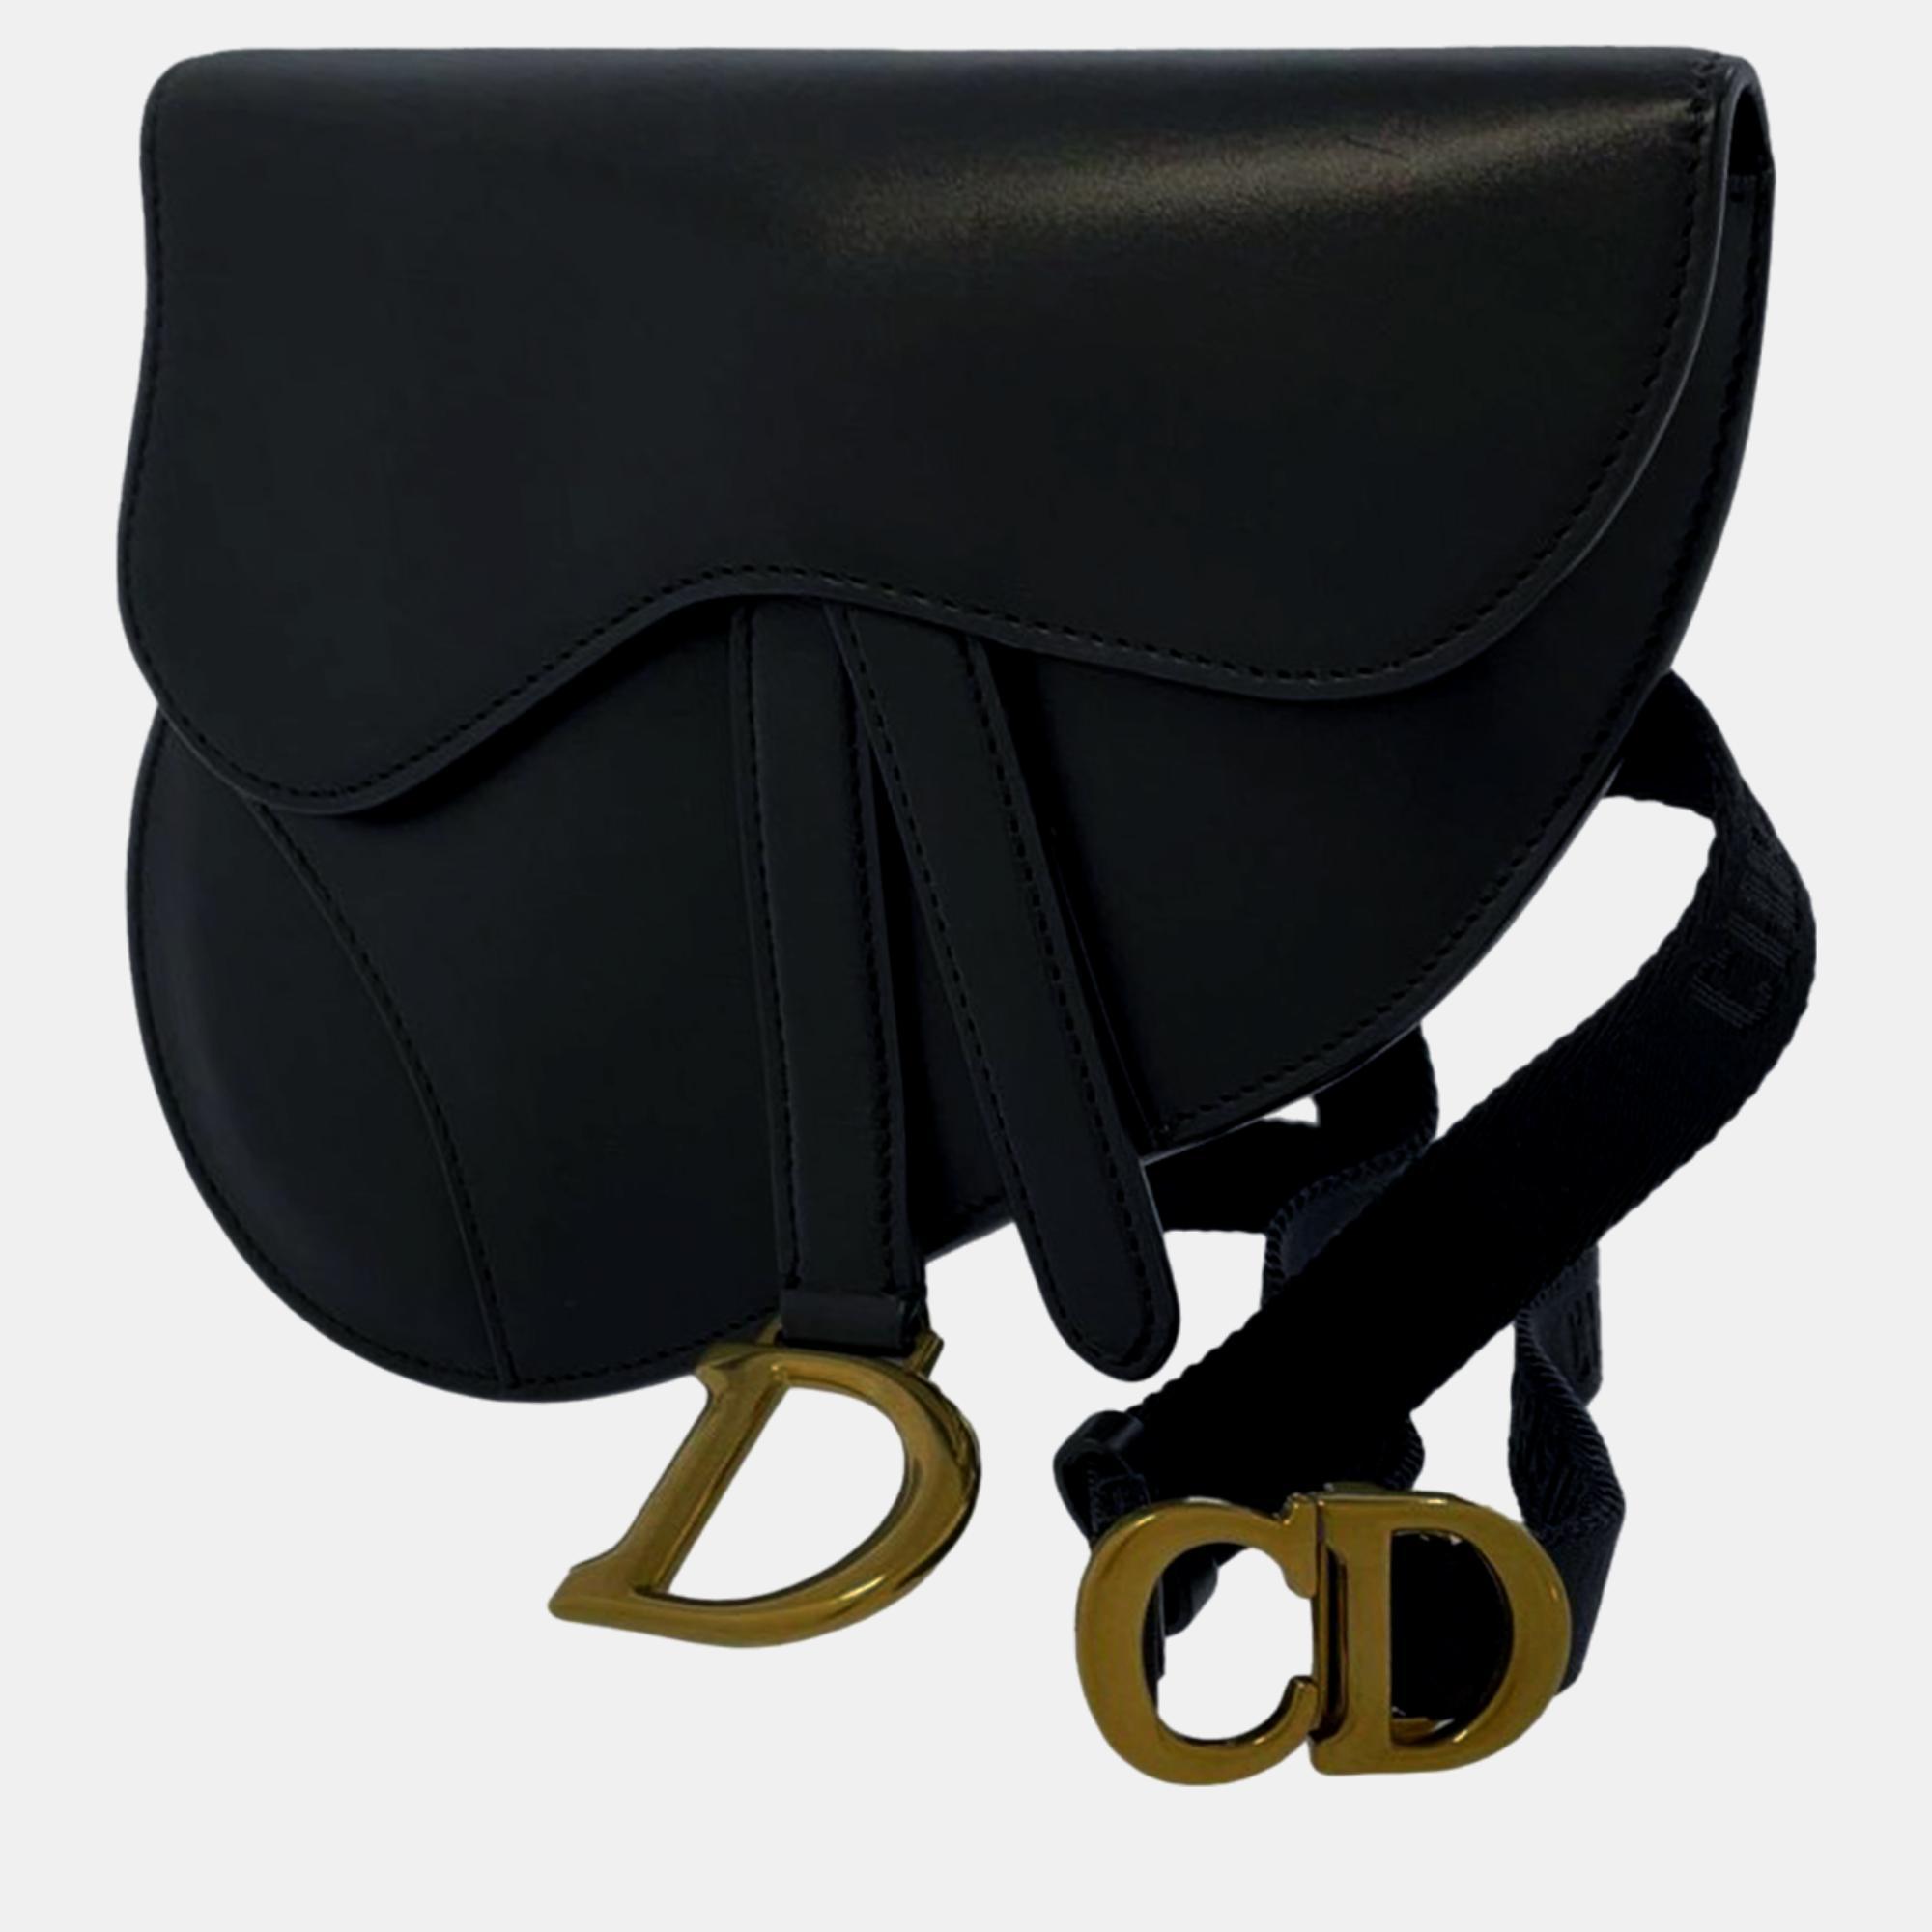 This satchel features a leather body an adjustable flat waist strap and a front flap closure.